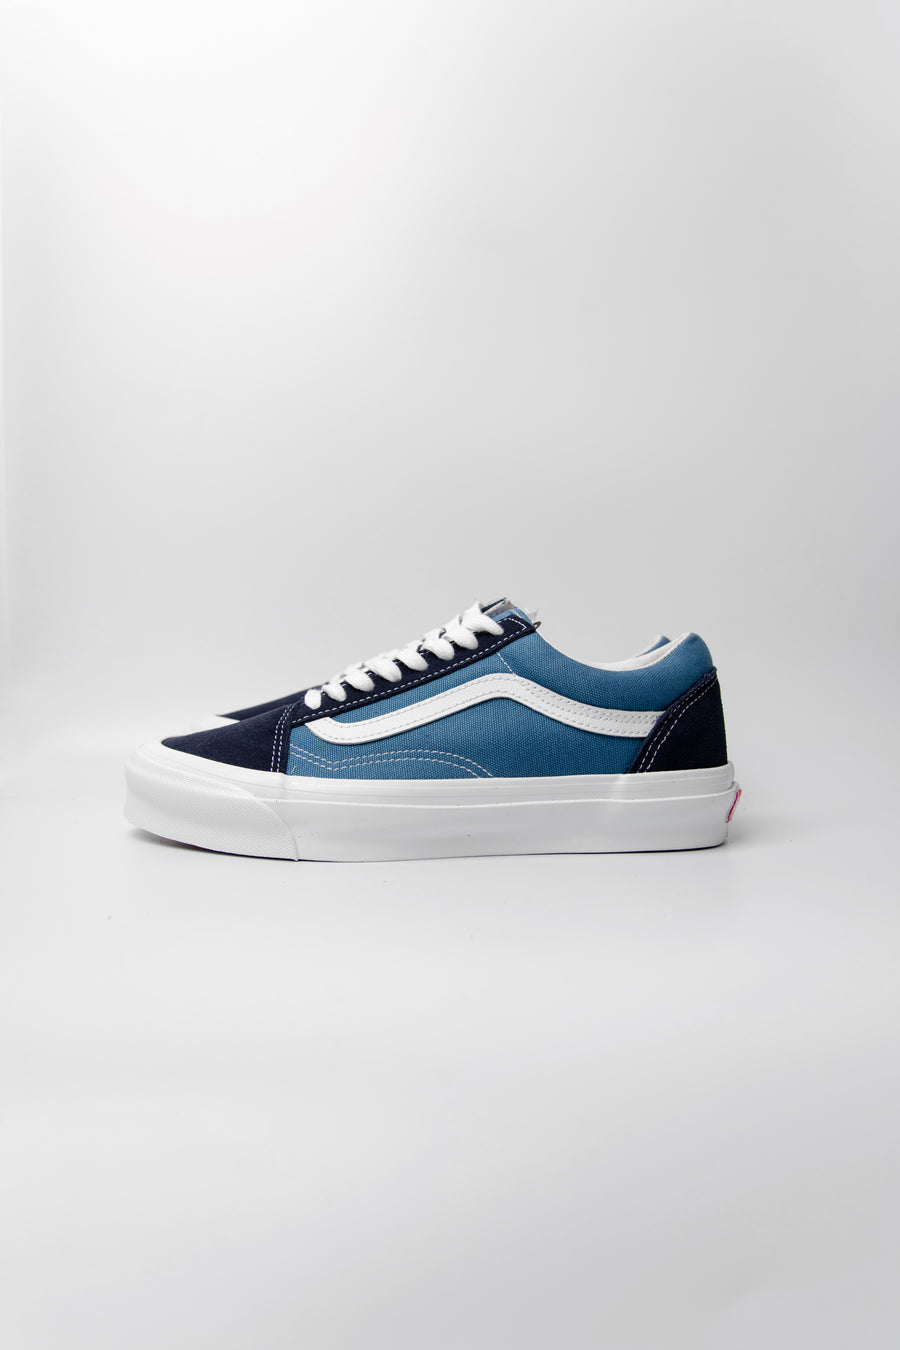 Old Skool LX Suede Navy/White VN0A4P3X5OC